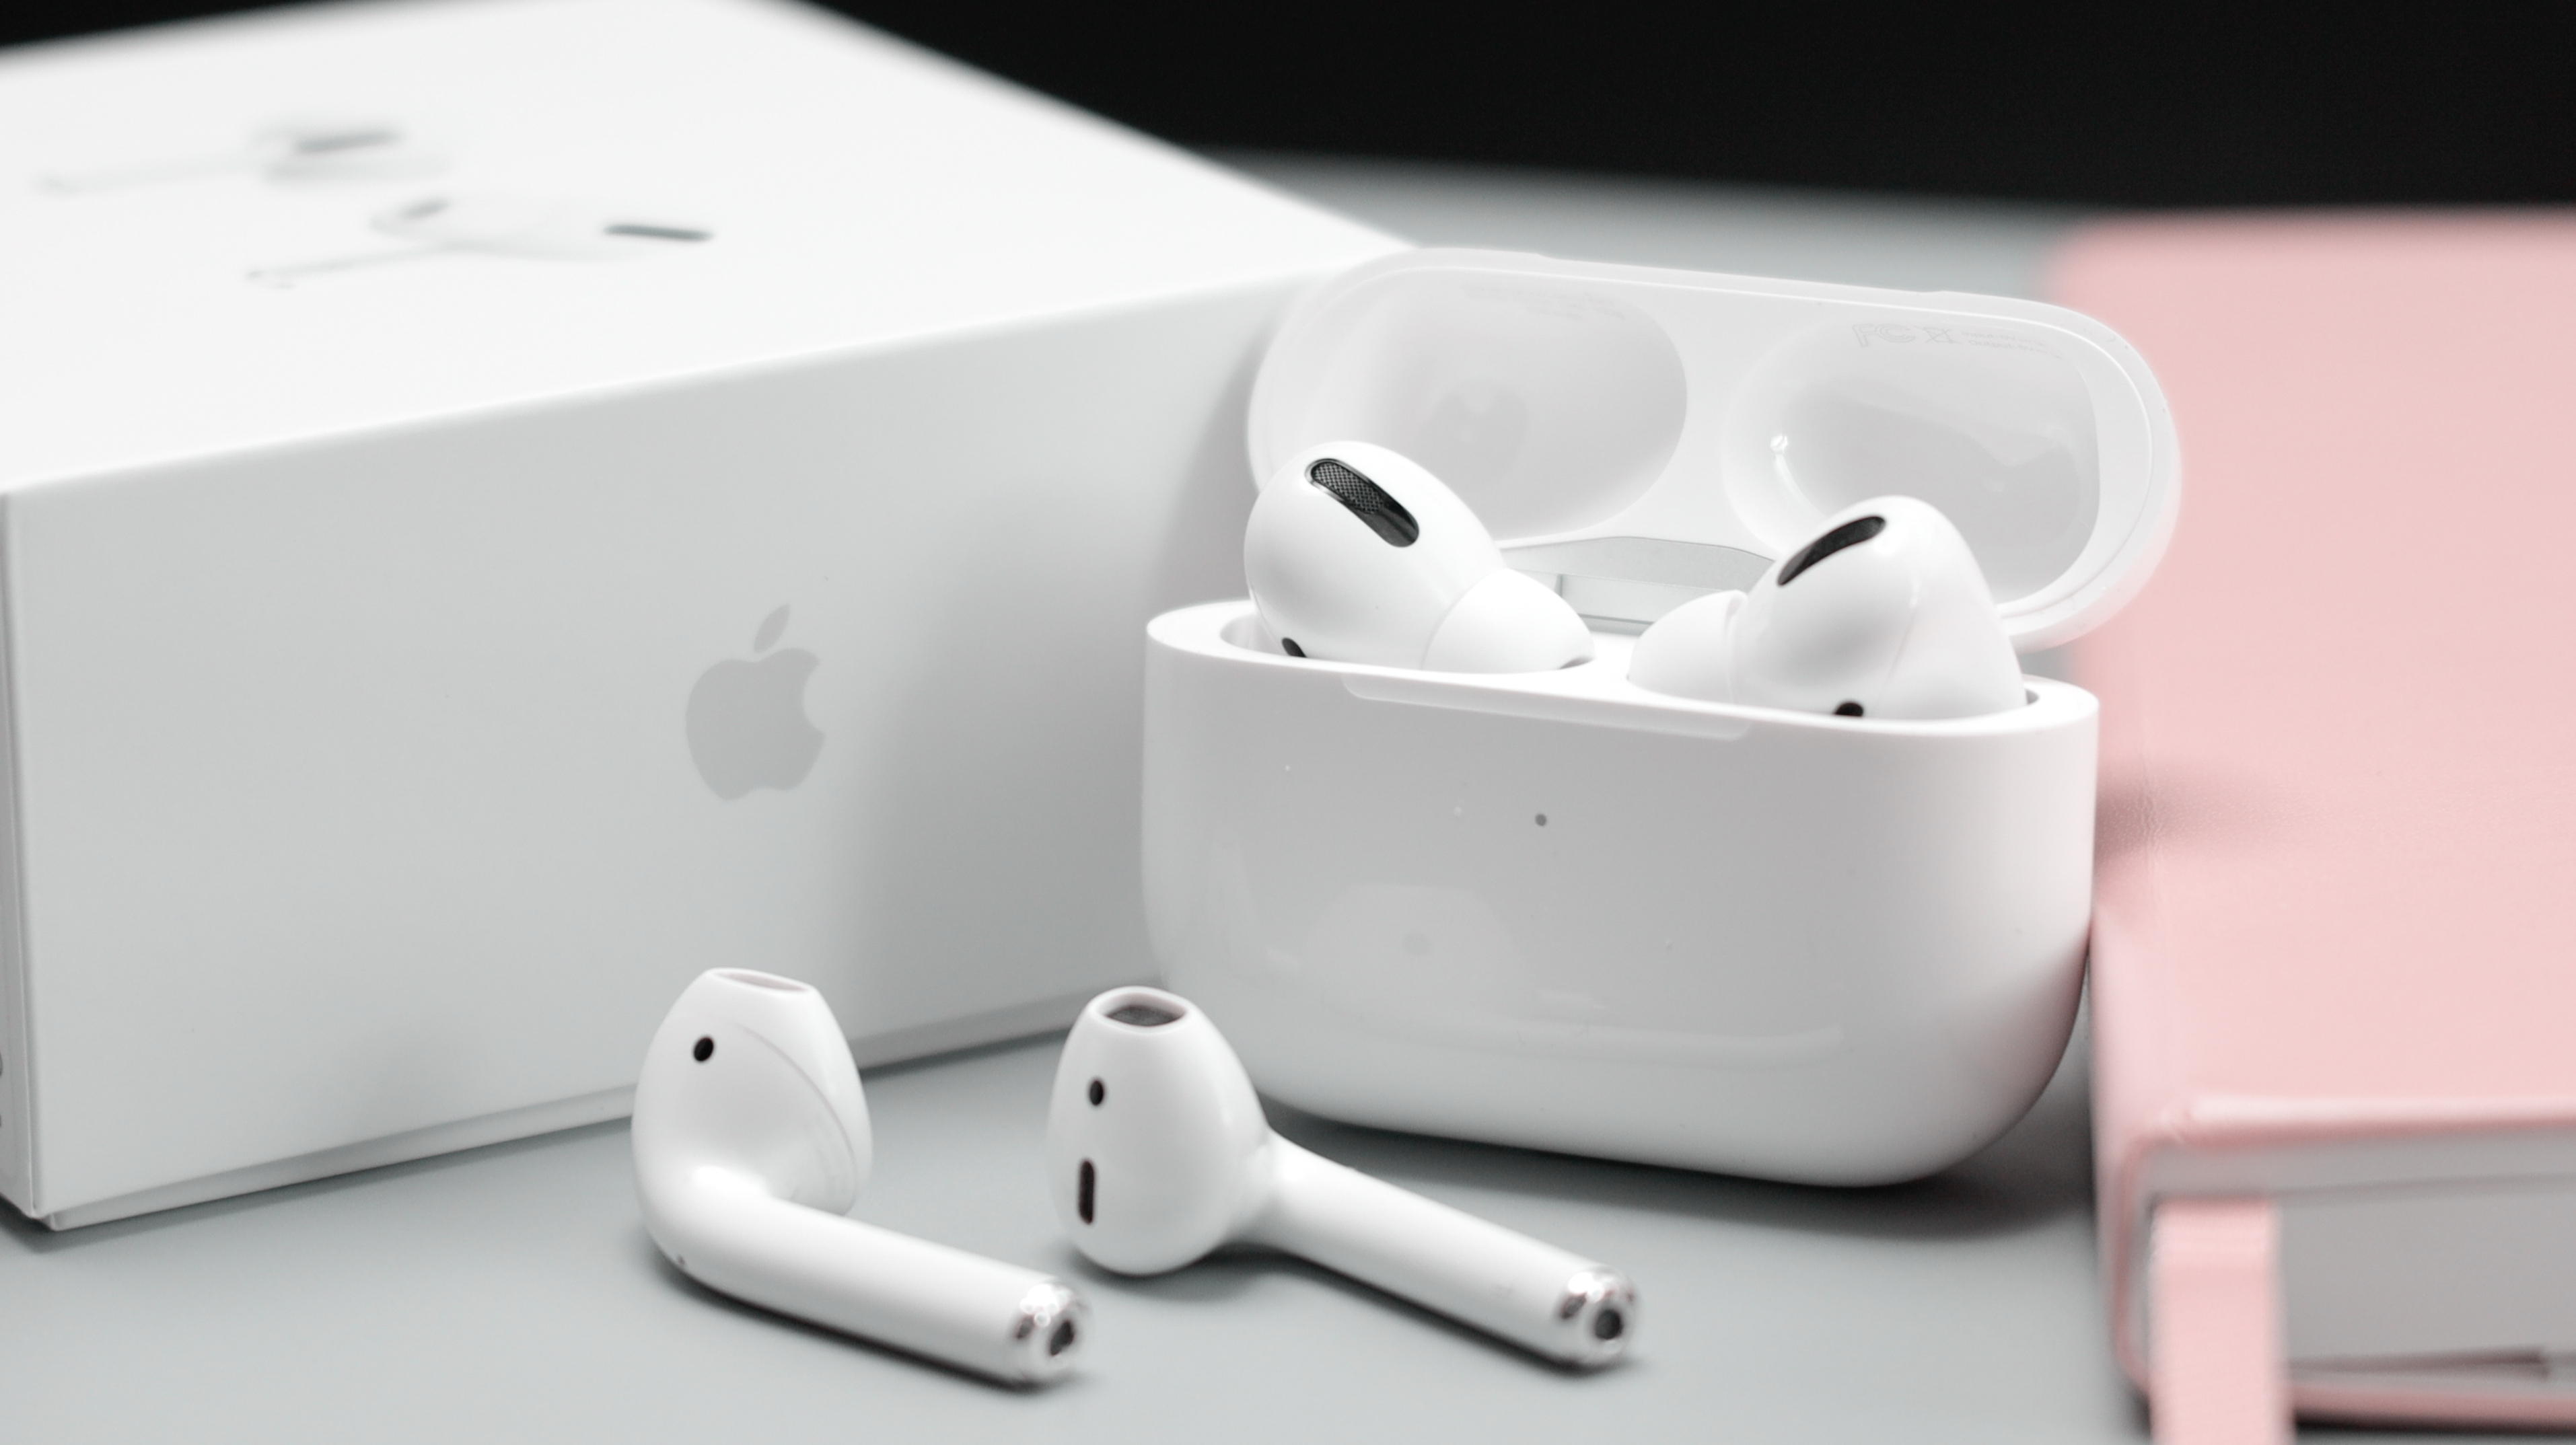 Airpods 2 чип. Apple AIRPODS 2. Эппл аирподс 3. Apple AIRPODS Pro 2. Apple AIRPODS Pro 3.